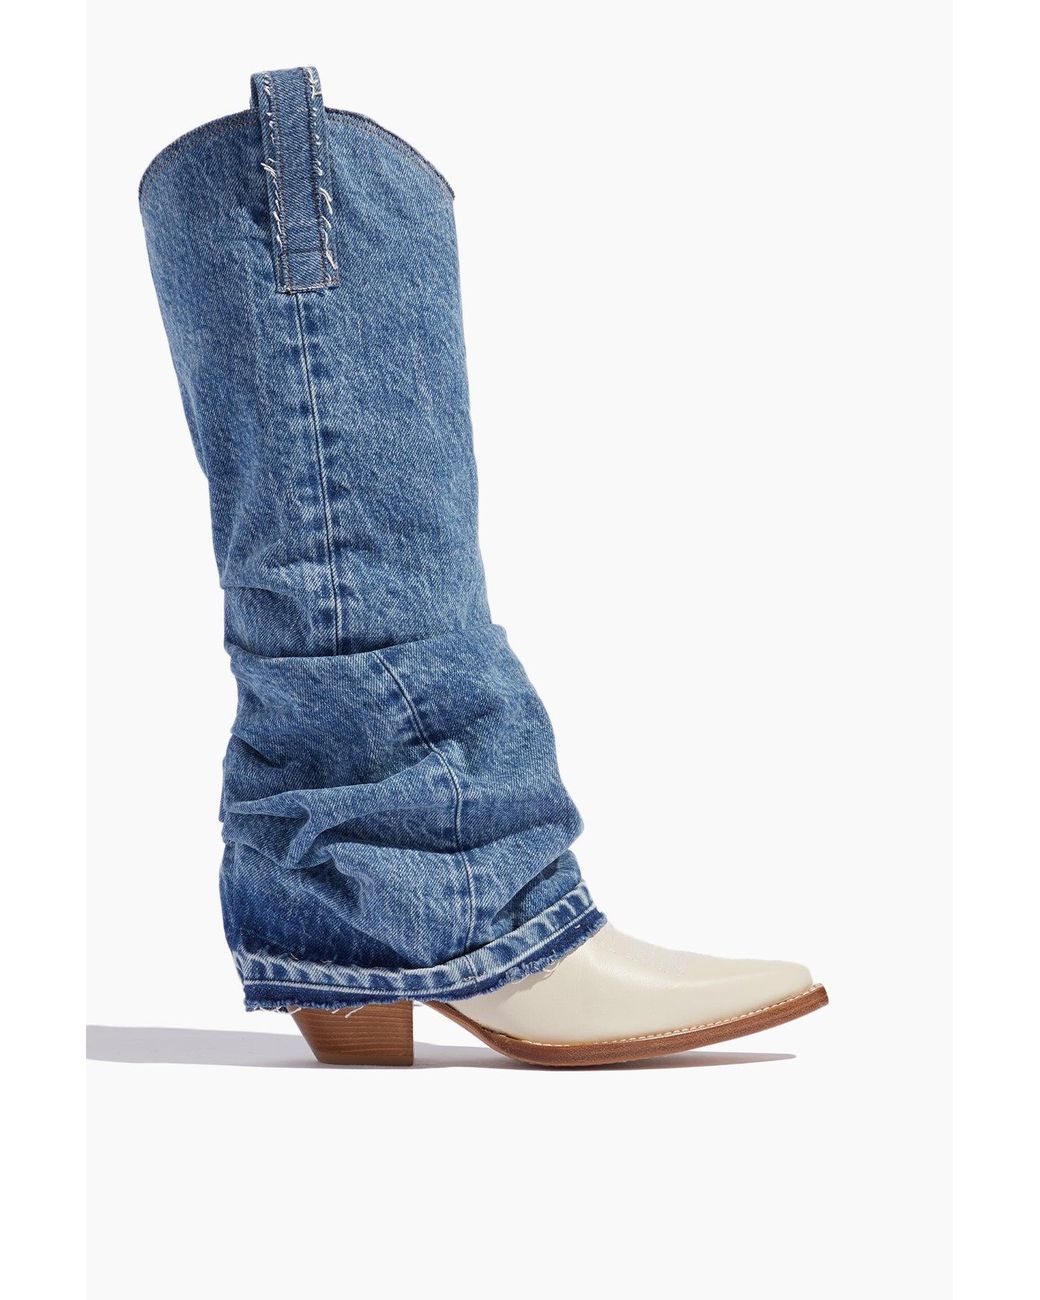 MID COWBOY BOOTS WITH DENIM SLEEVE - BLUE AND WHITE